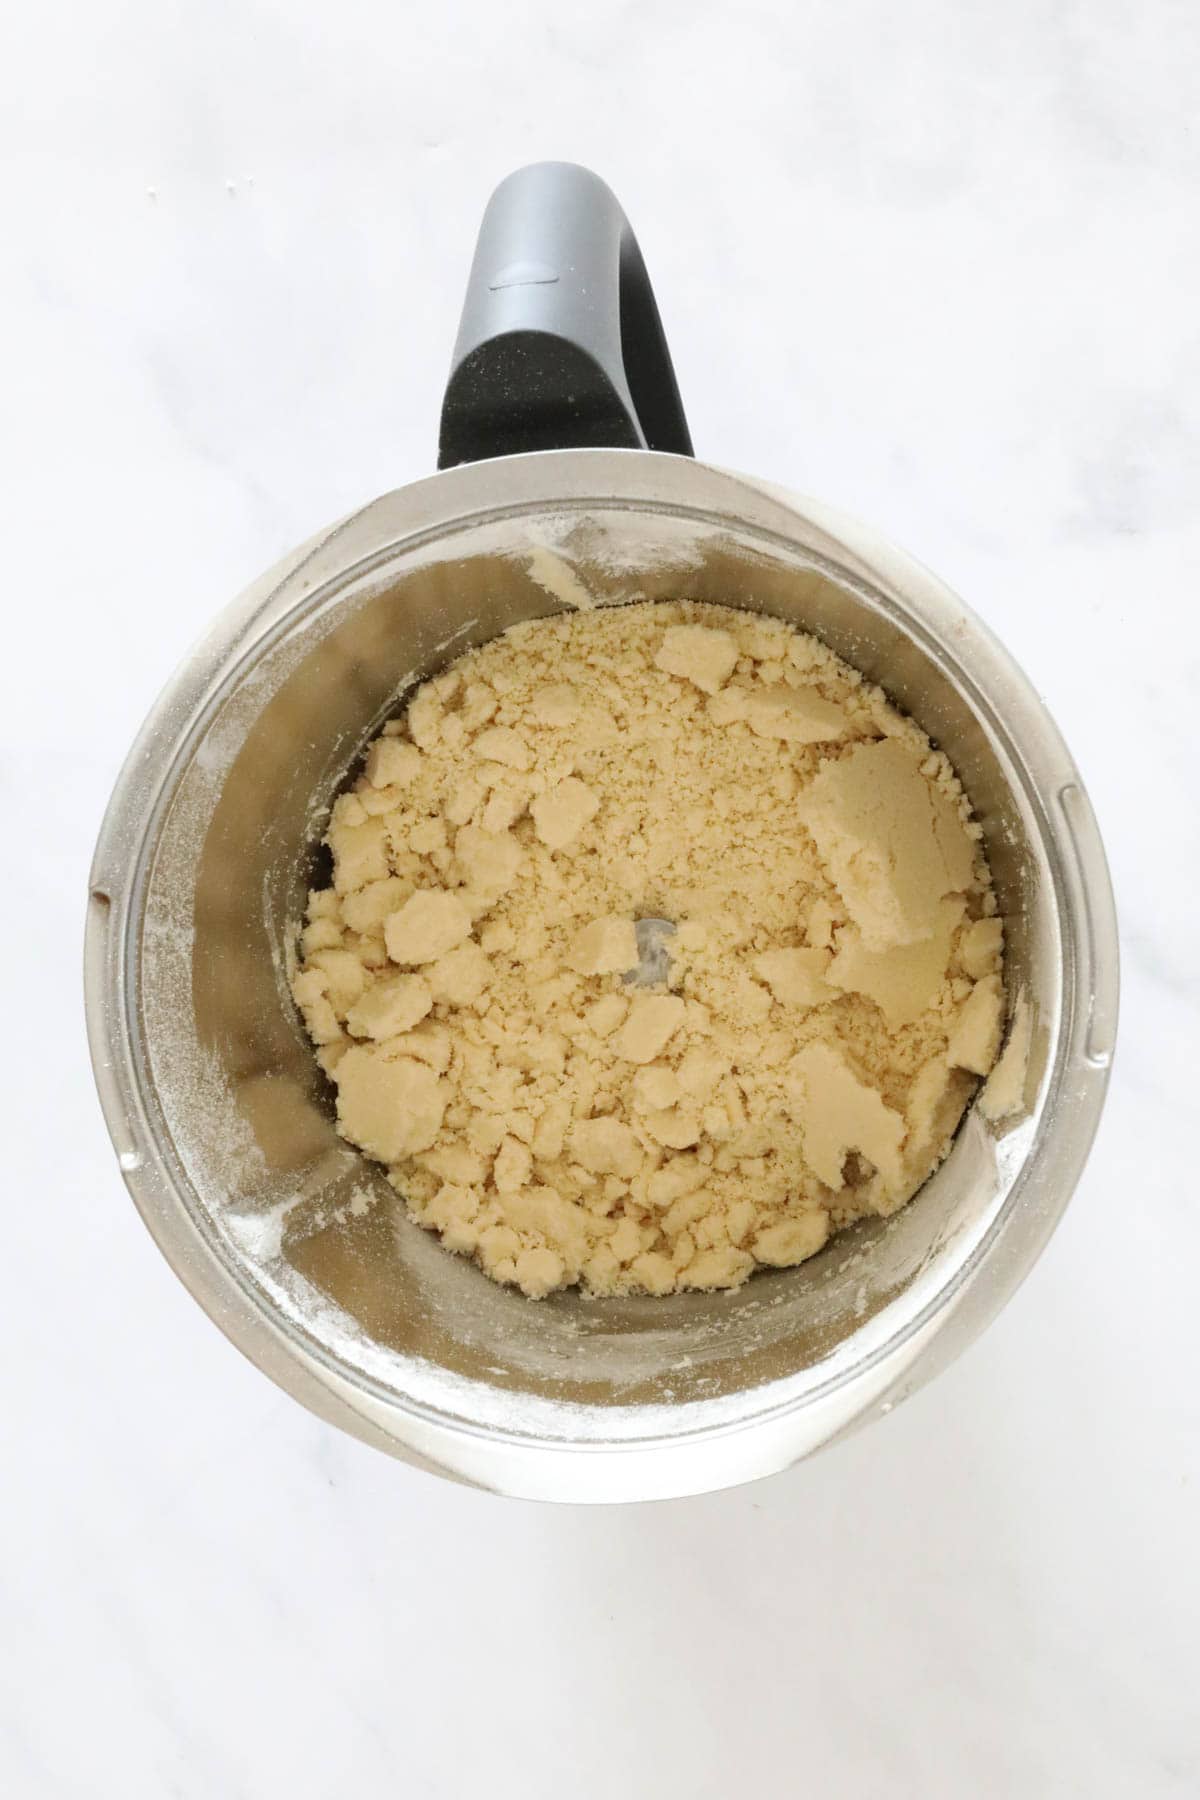 Breadcrumbs in a Thermomix.